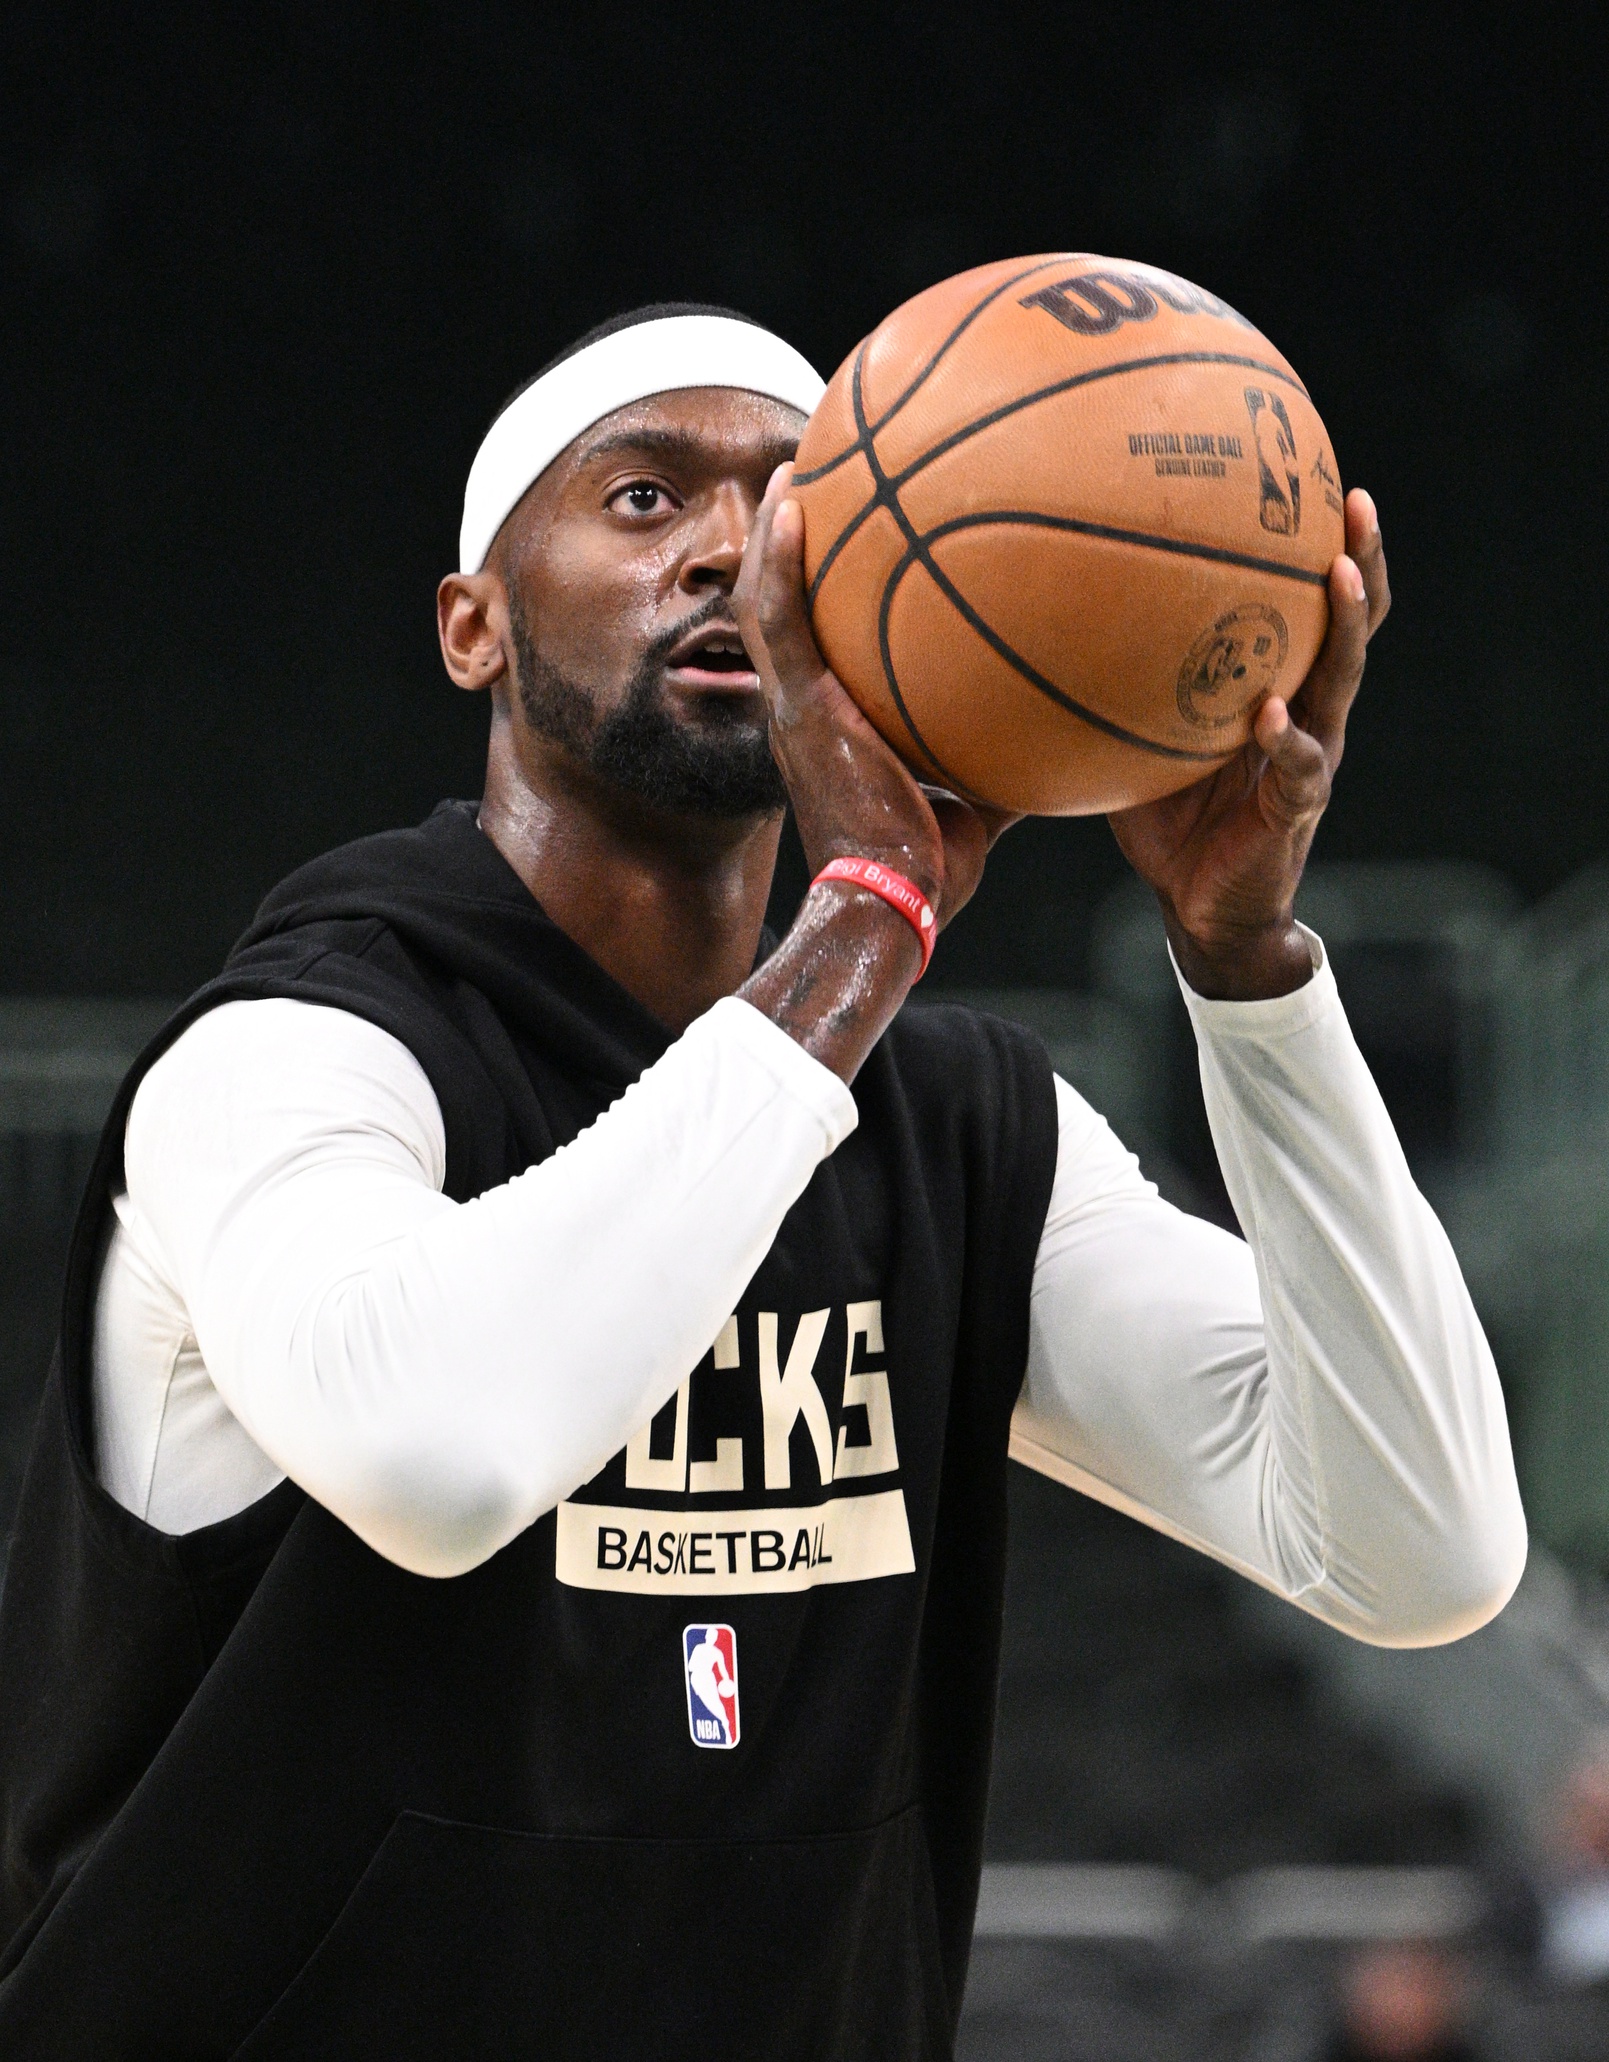 USA Basketball. Apr 26, 2023; Milwaukee, Wisconsin, USA; Milwaukee Bucks forward Bobby Portis (9) shoots freethows during warmups before game five against the Miami Heat of the 2023 NBA Playoffs at Fiserv Forum. Mandatory Credit: Michael McLoone-USA TODAY Sports